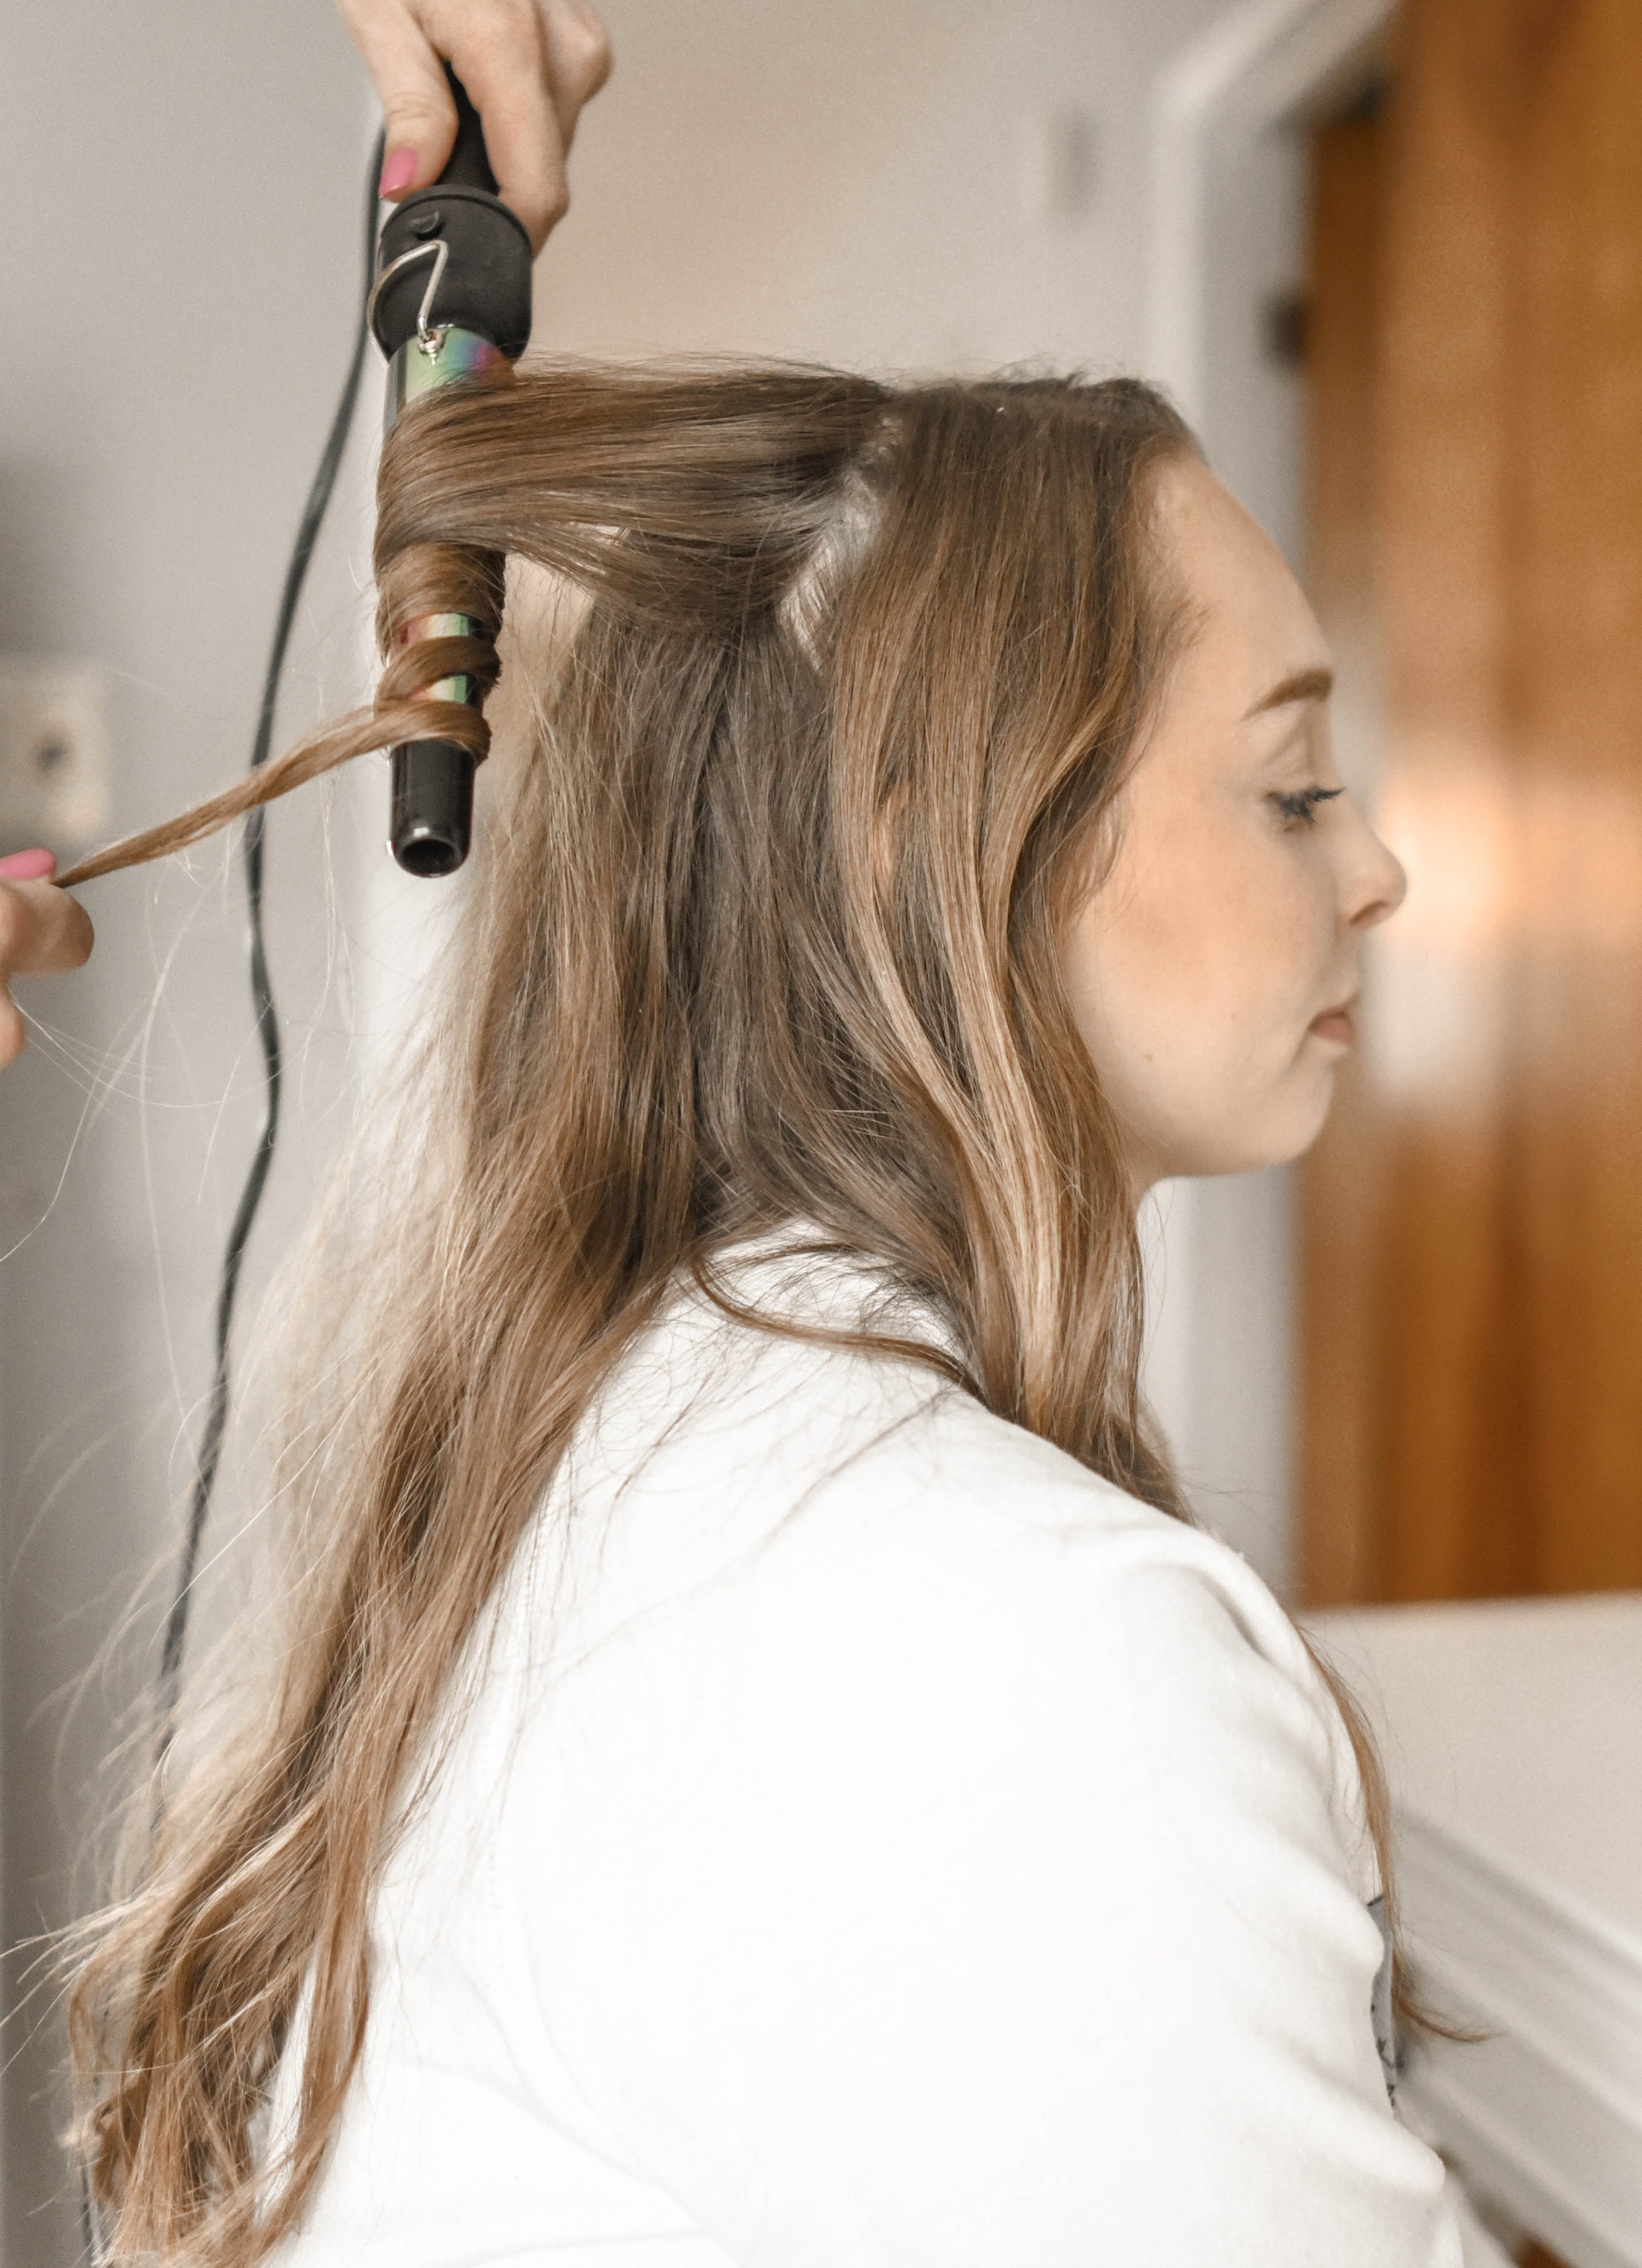 A woman getting her hair curled | Source: Pexels